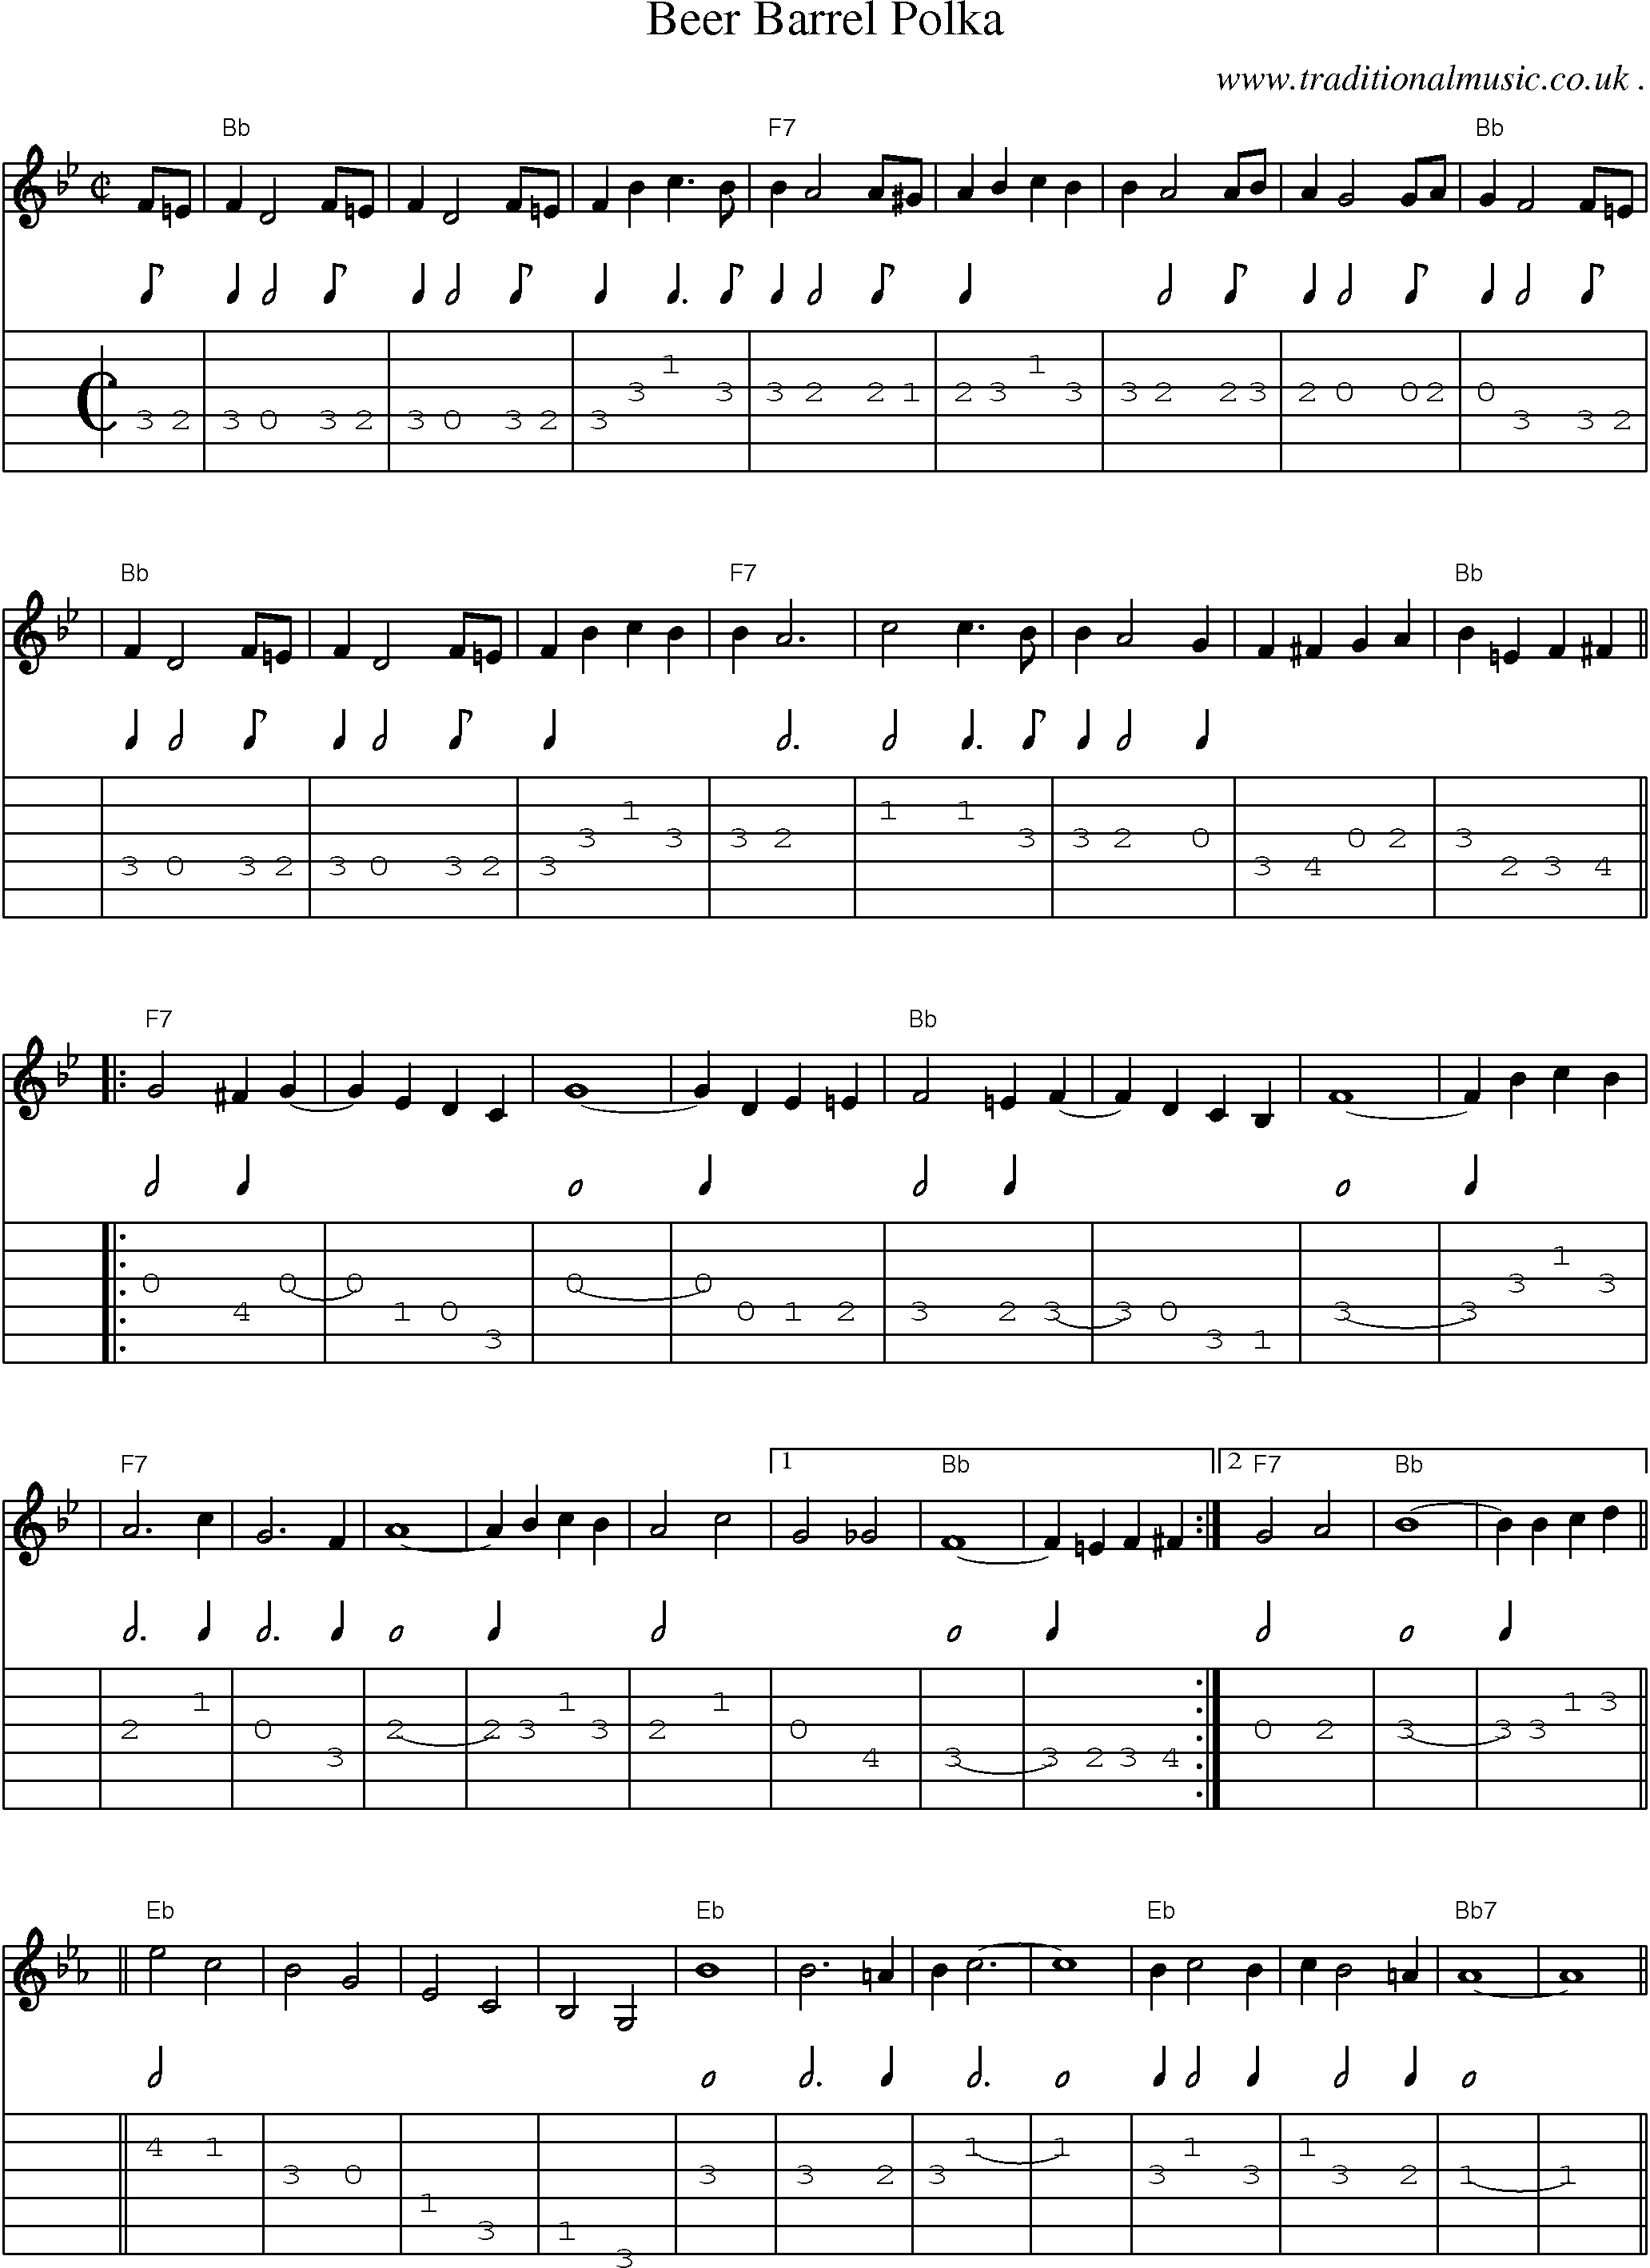 Music Score and Guitar Tabs for Beer Barrel Polka